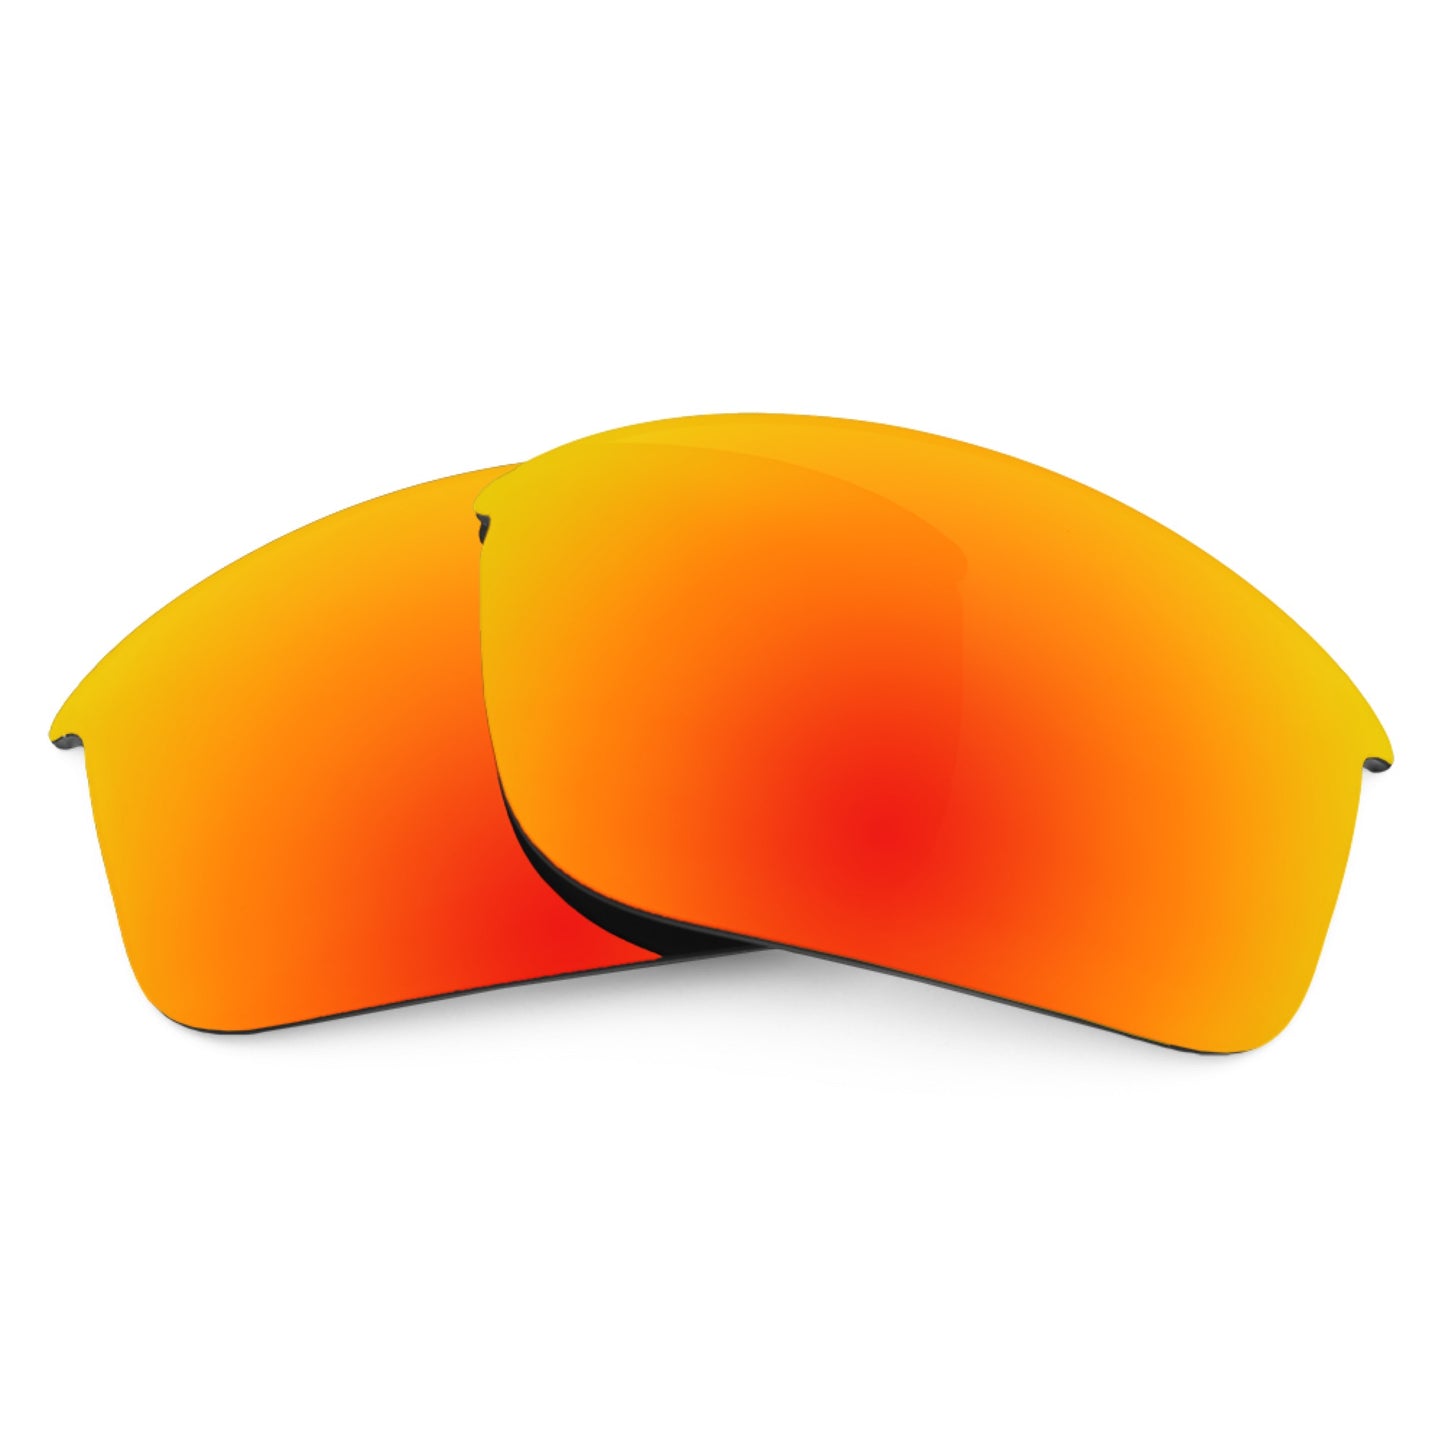 Revant replacement lenses for Nike Skylon Ace Polarized Fire Red